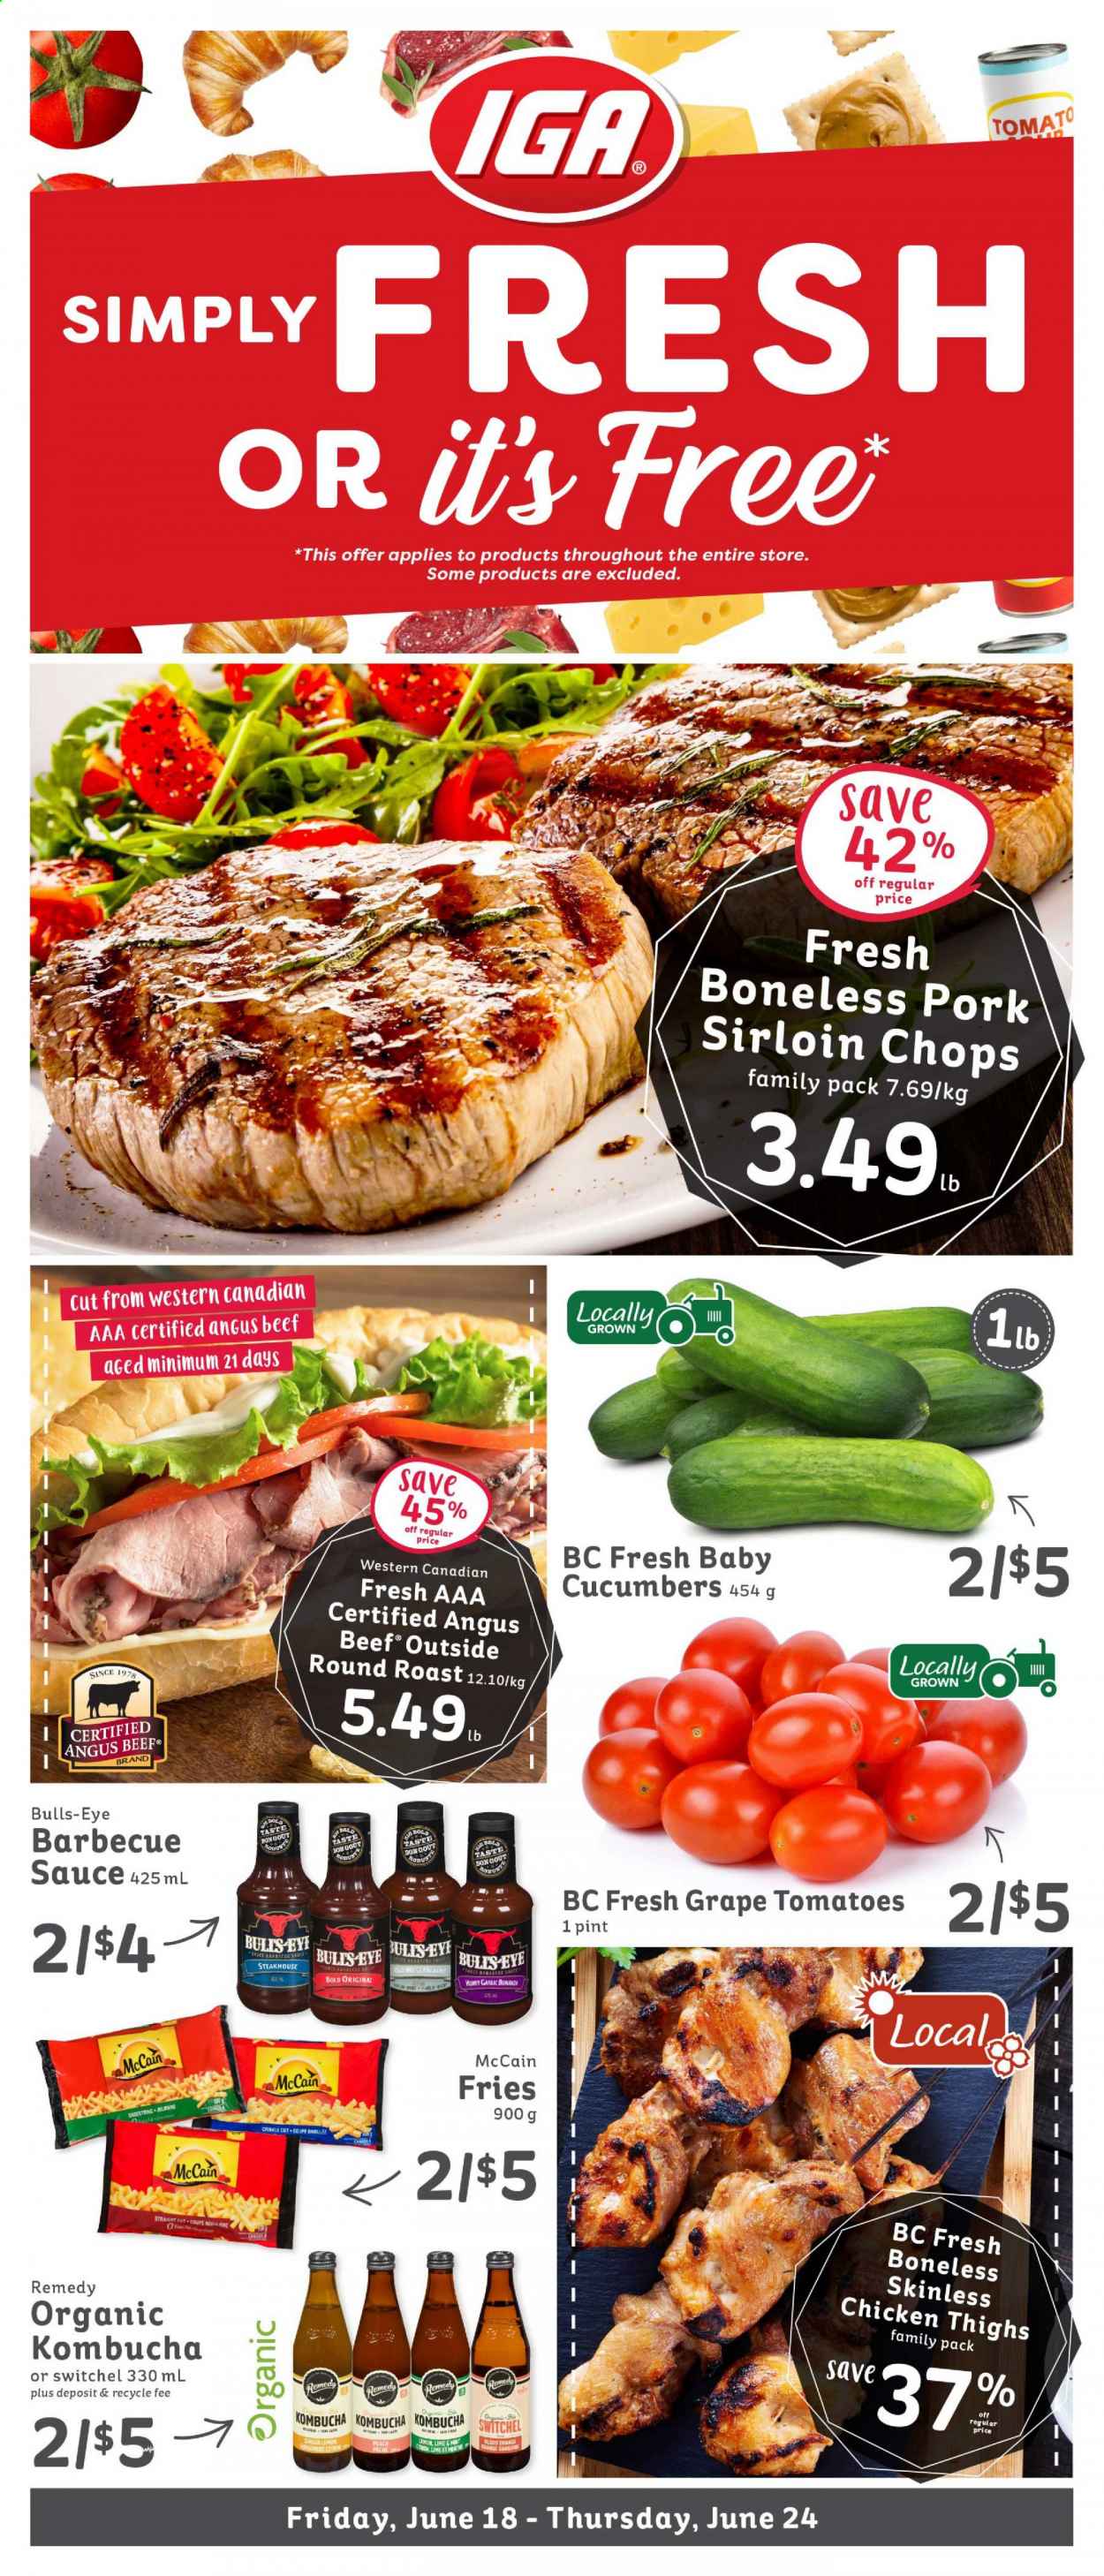 thumbnail - IGA Simple Goodness Flyer - June 18, 2021 - June 24, 2021 - Sales products - Ace, cucumber, garlic, tomatoes, sauce, McCain, potato fries, BBQ sauce, kombucha, chicken thighs, chicken, beef meat, round roast, pork loin. Page 1.